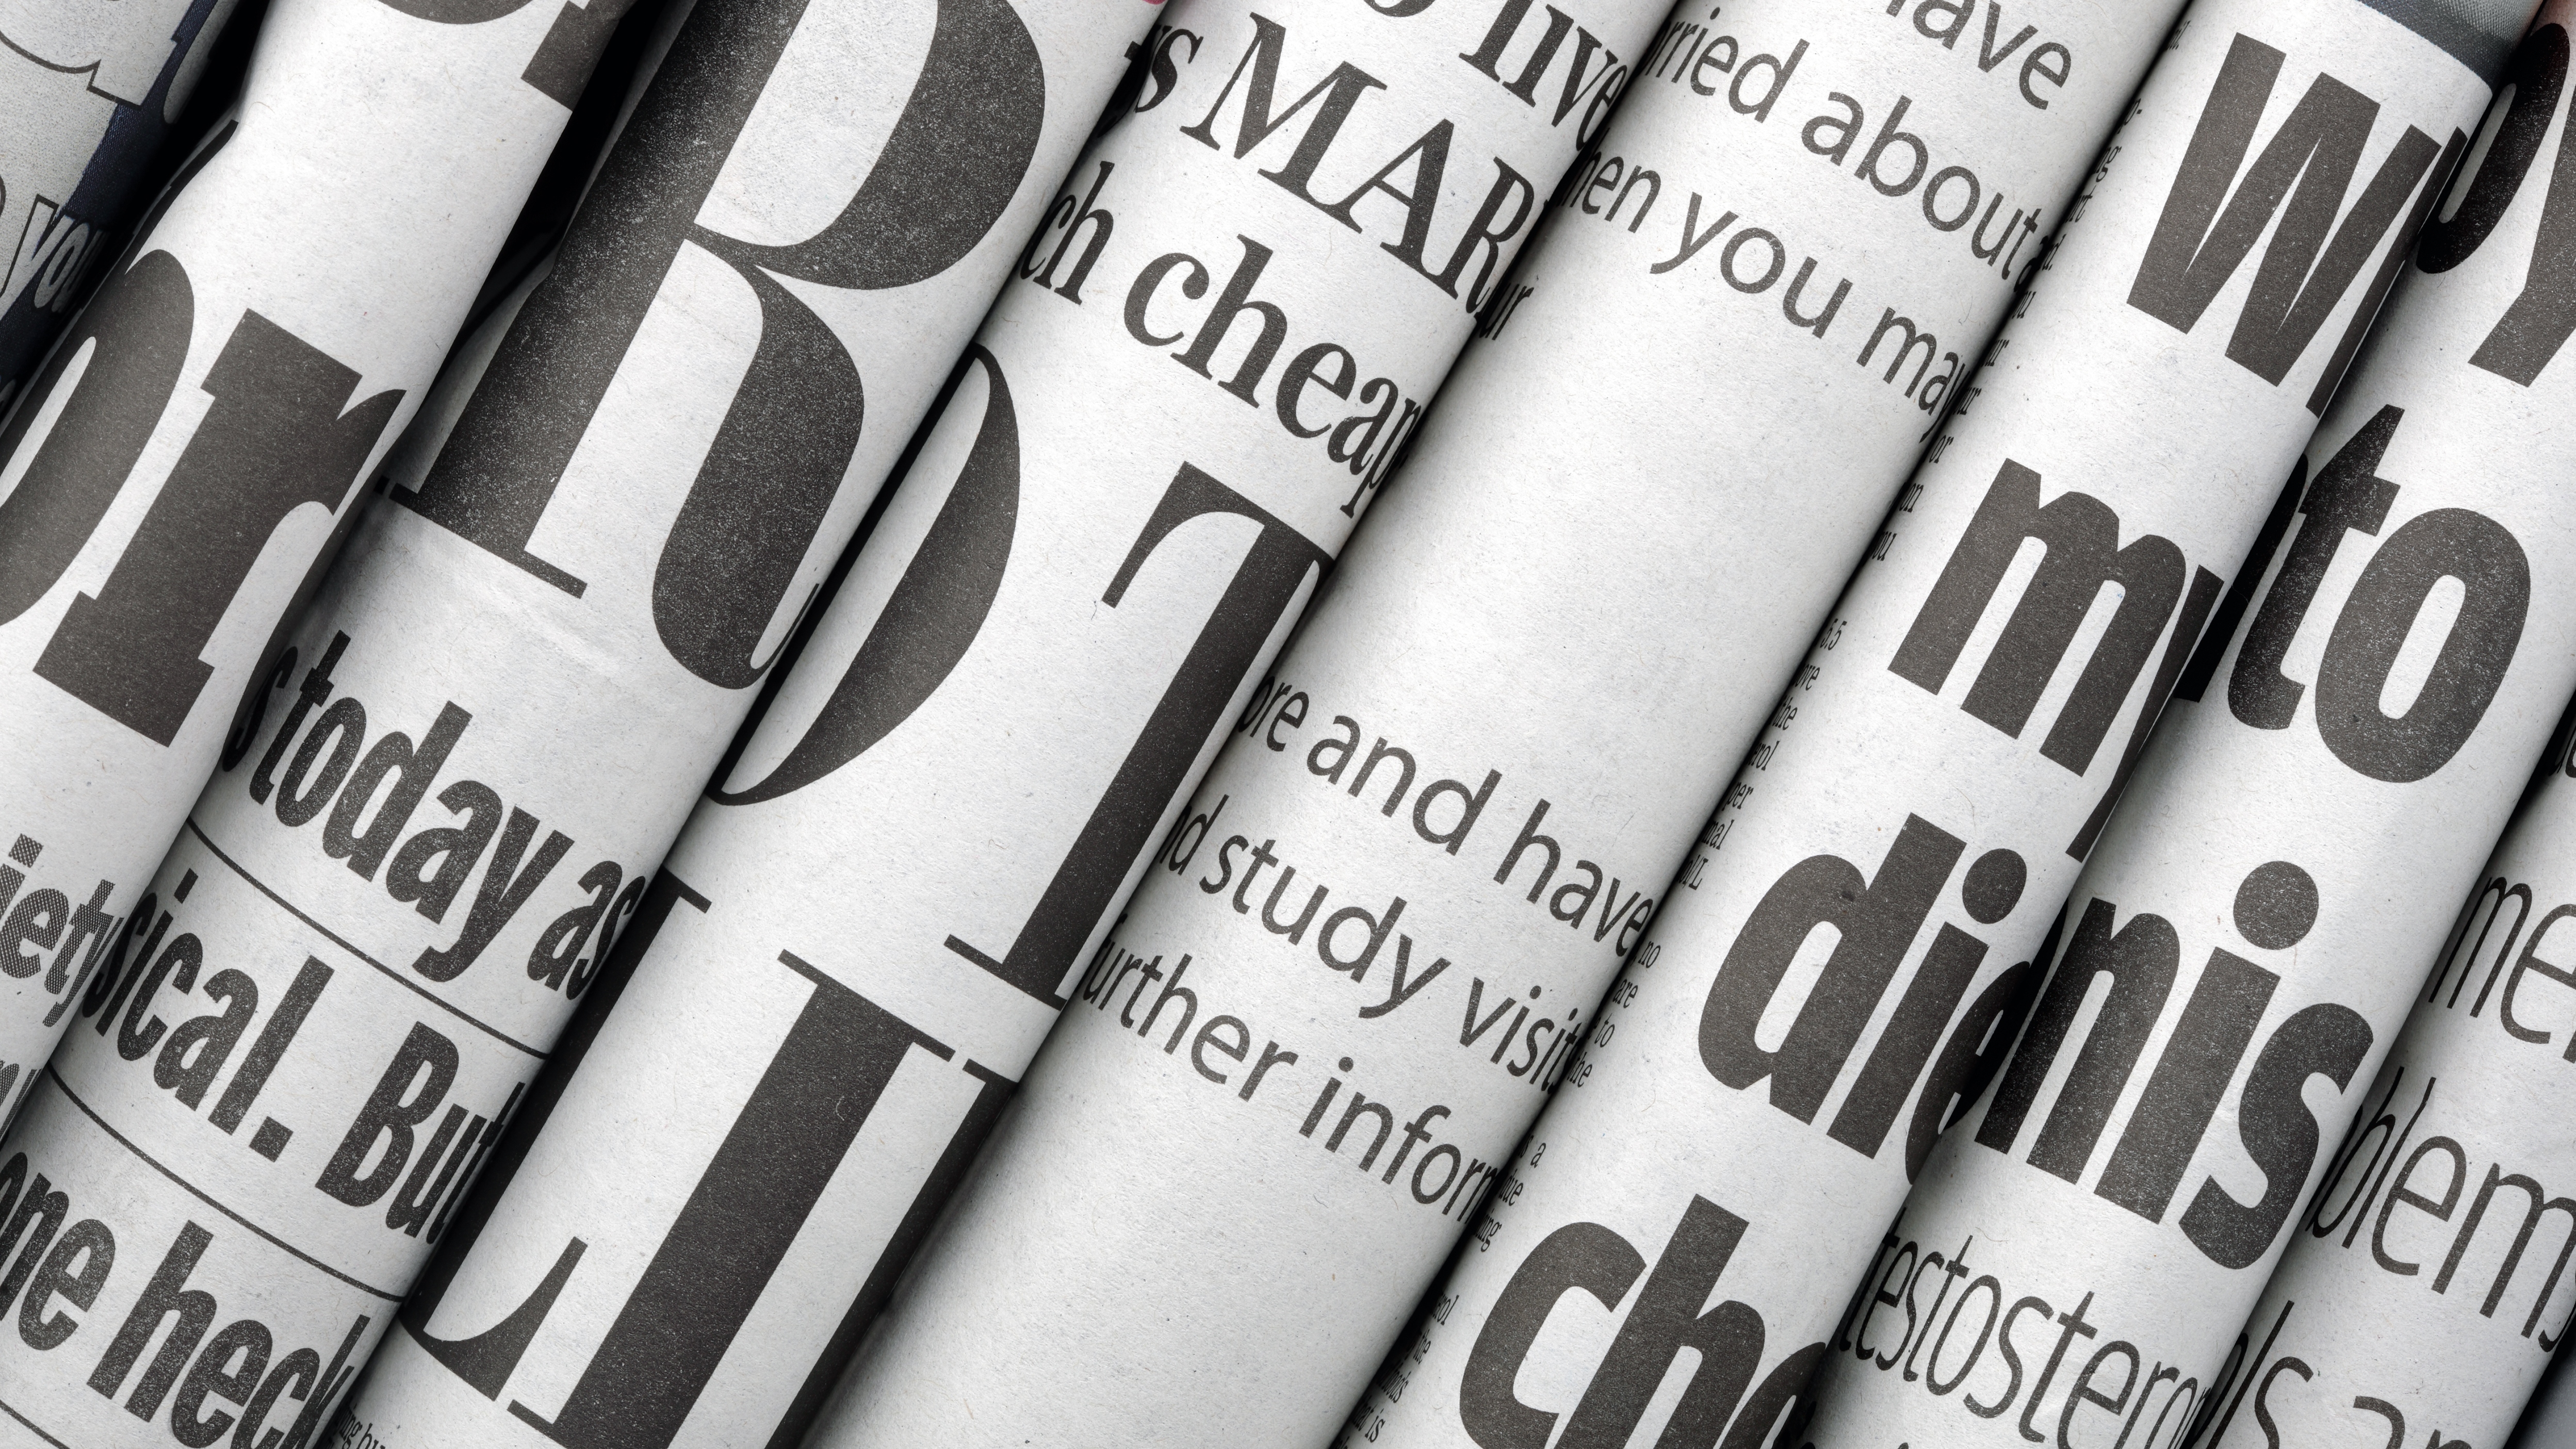 Newspaper headlines shown side on in a stack of daily newspapers